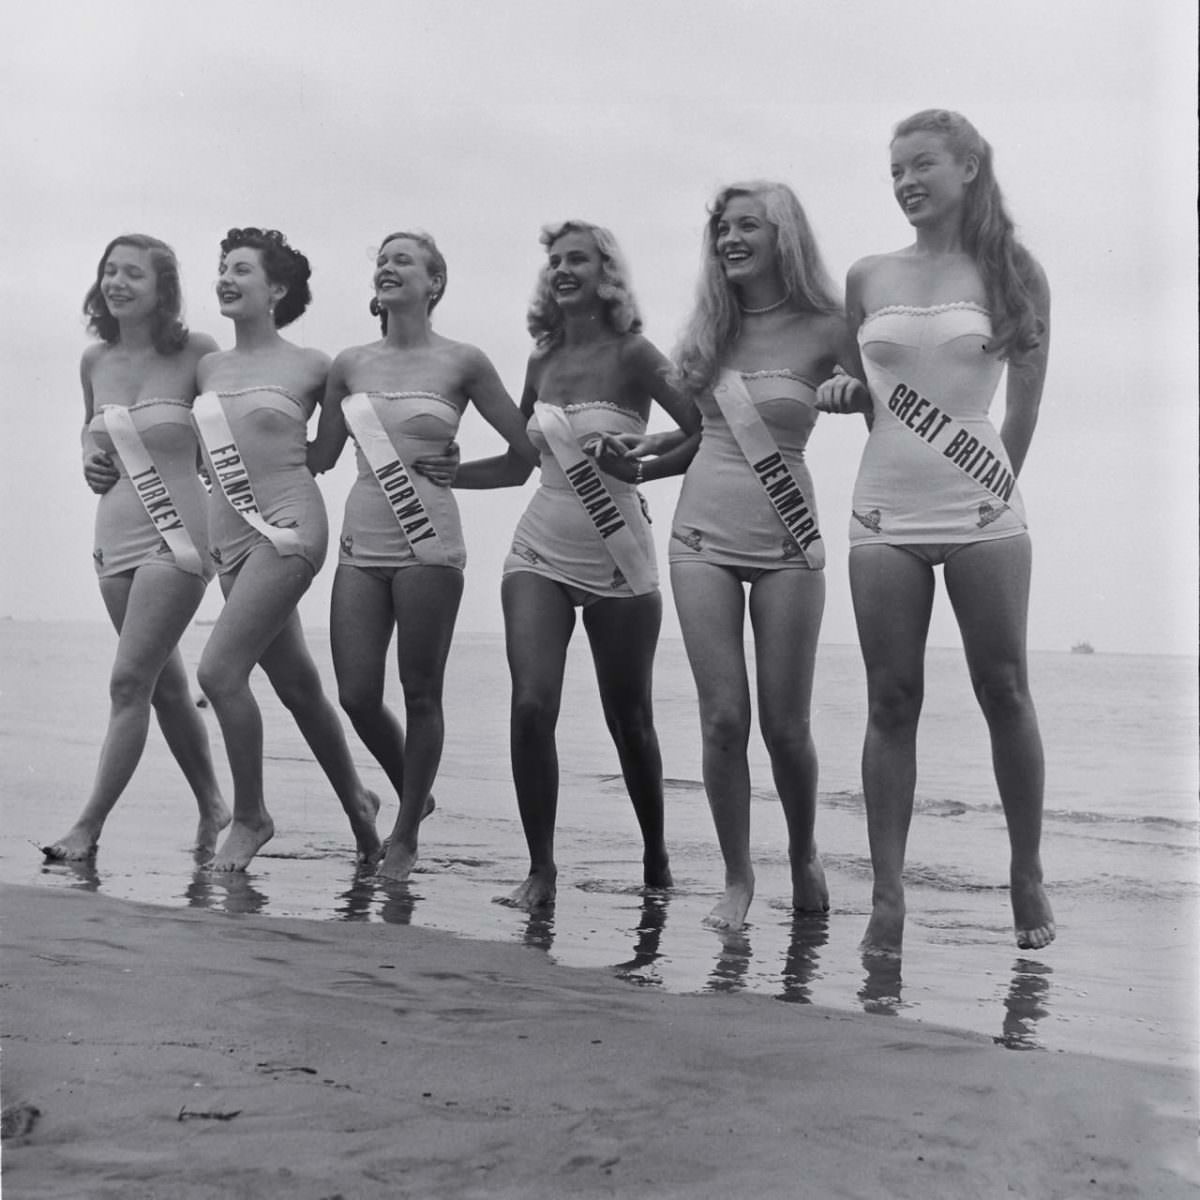 Competitors in the first Miss World contest at the Empire Rooms on Tottenham Court Road, London. 27th July 1951